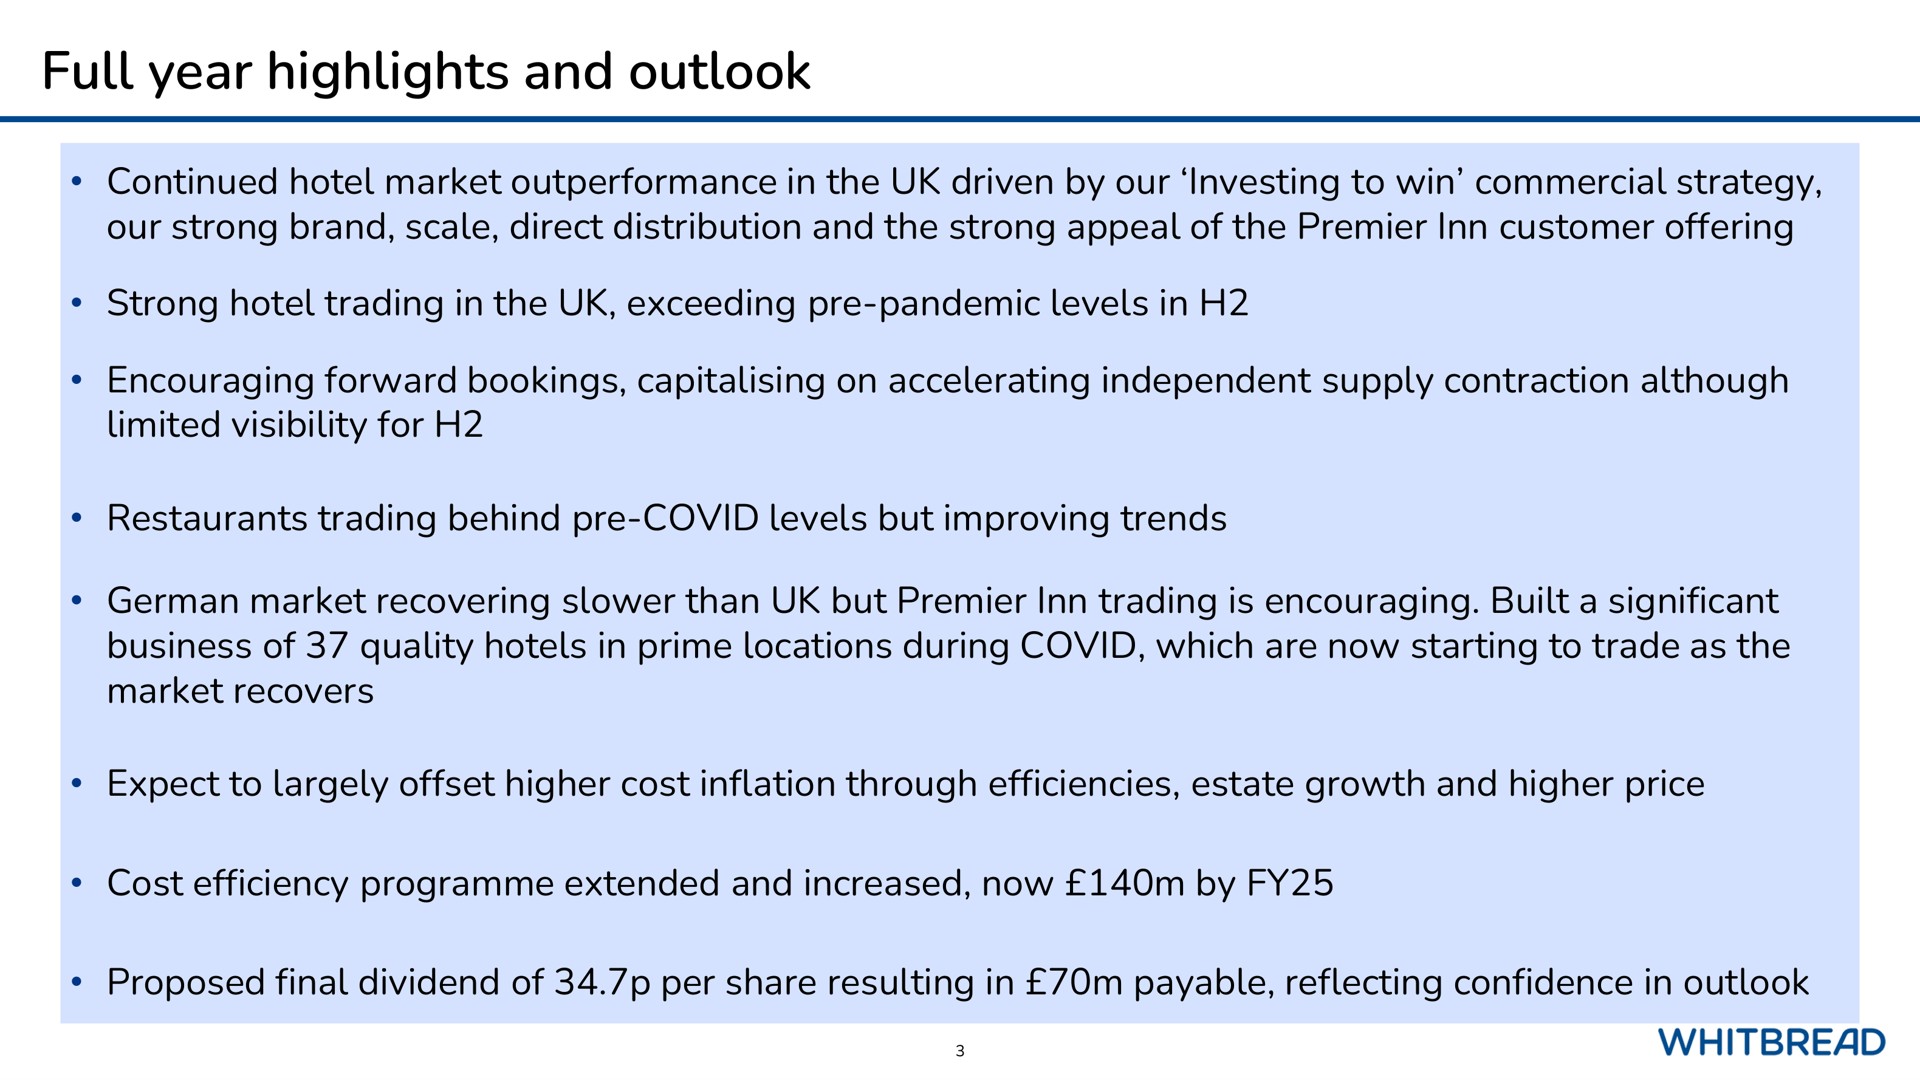 full year highlights and outlook continued hotel market in the driven by our investing to win commercial strategy our strong brand scale direct distribution and the strong appeal of the premier inn customer offering strong hotel trading in the exceeding pandemic levels in encouraging forward bookings on accelerating independent supply contraction although limited visibility for restaurants trading behind covid levels but improving trends german market recovering than but premier inn trading is encouraging built a significant business of quality hotels in prime locations during covid which are now starting to trade as the market recovers expect to largely offset higher cost inflation through efficiencies estate growth and higher price cost efficiency extended and increased now by proposed final dividend of per share resulting in payable reflecting confidence in outlook | Whitebread